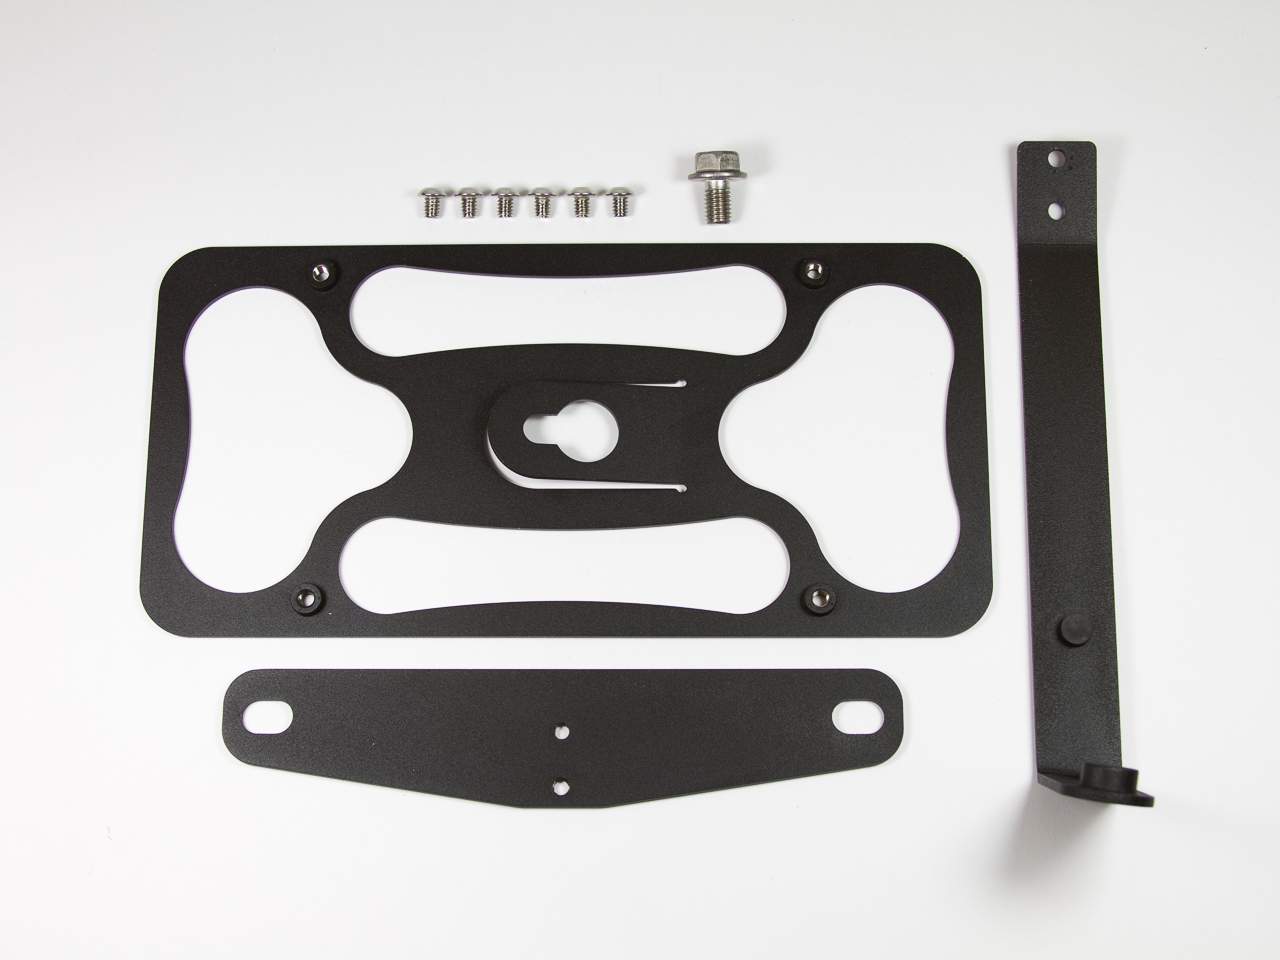 Parts list for The Platypus License Plate Mount for 2013-2022 Fiat 500e